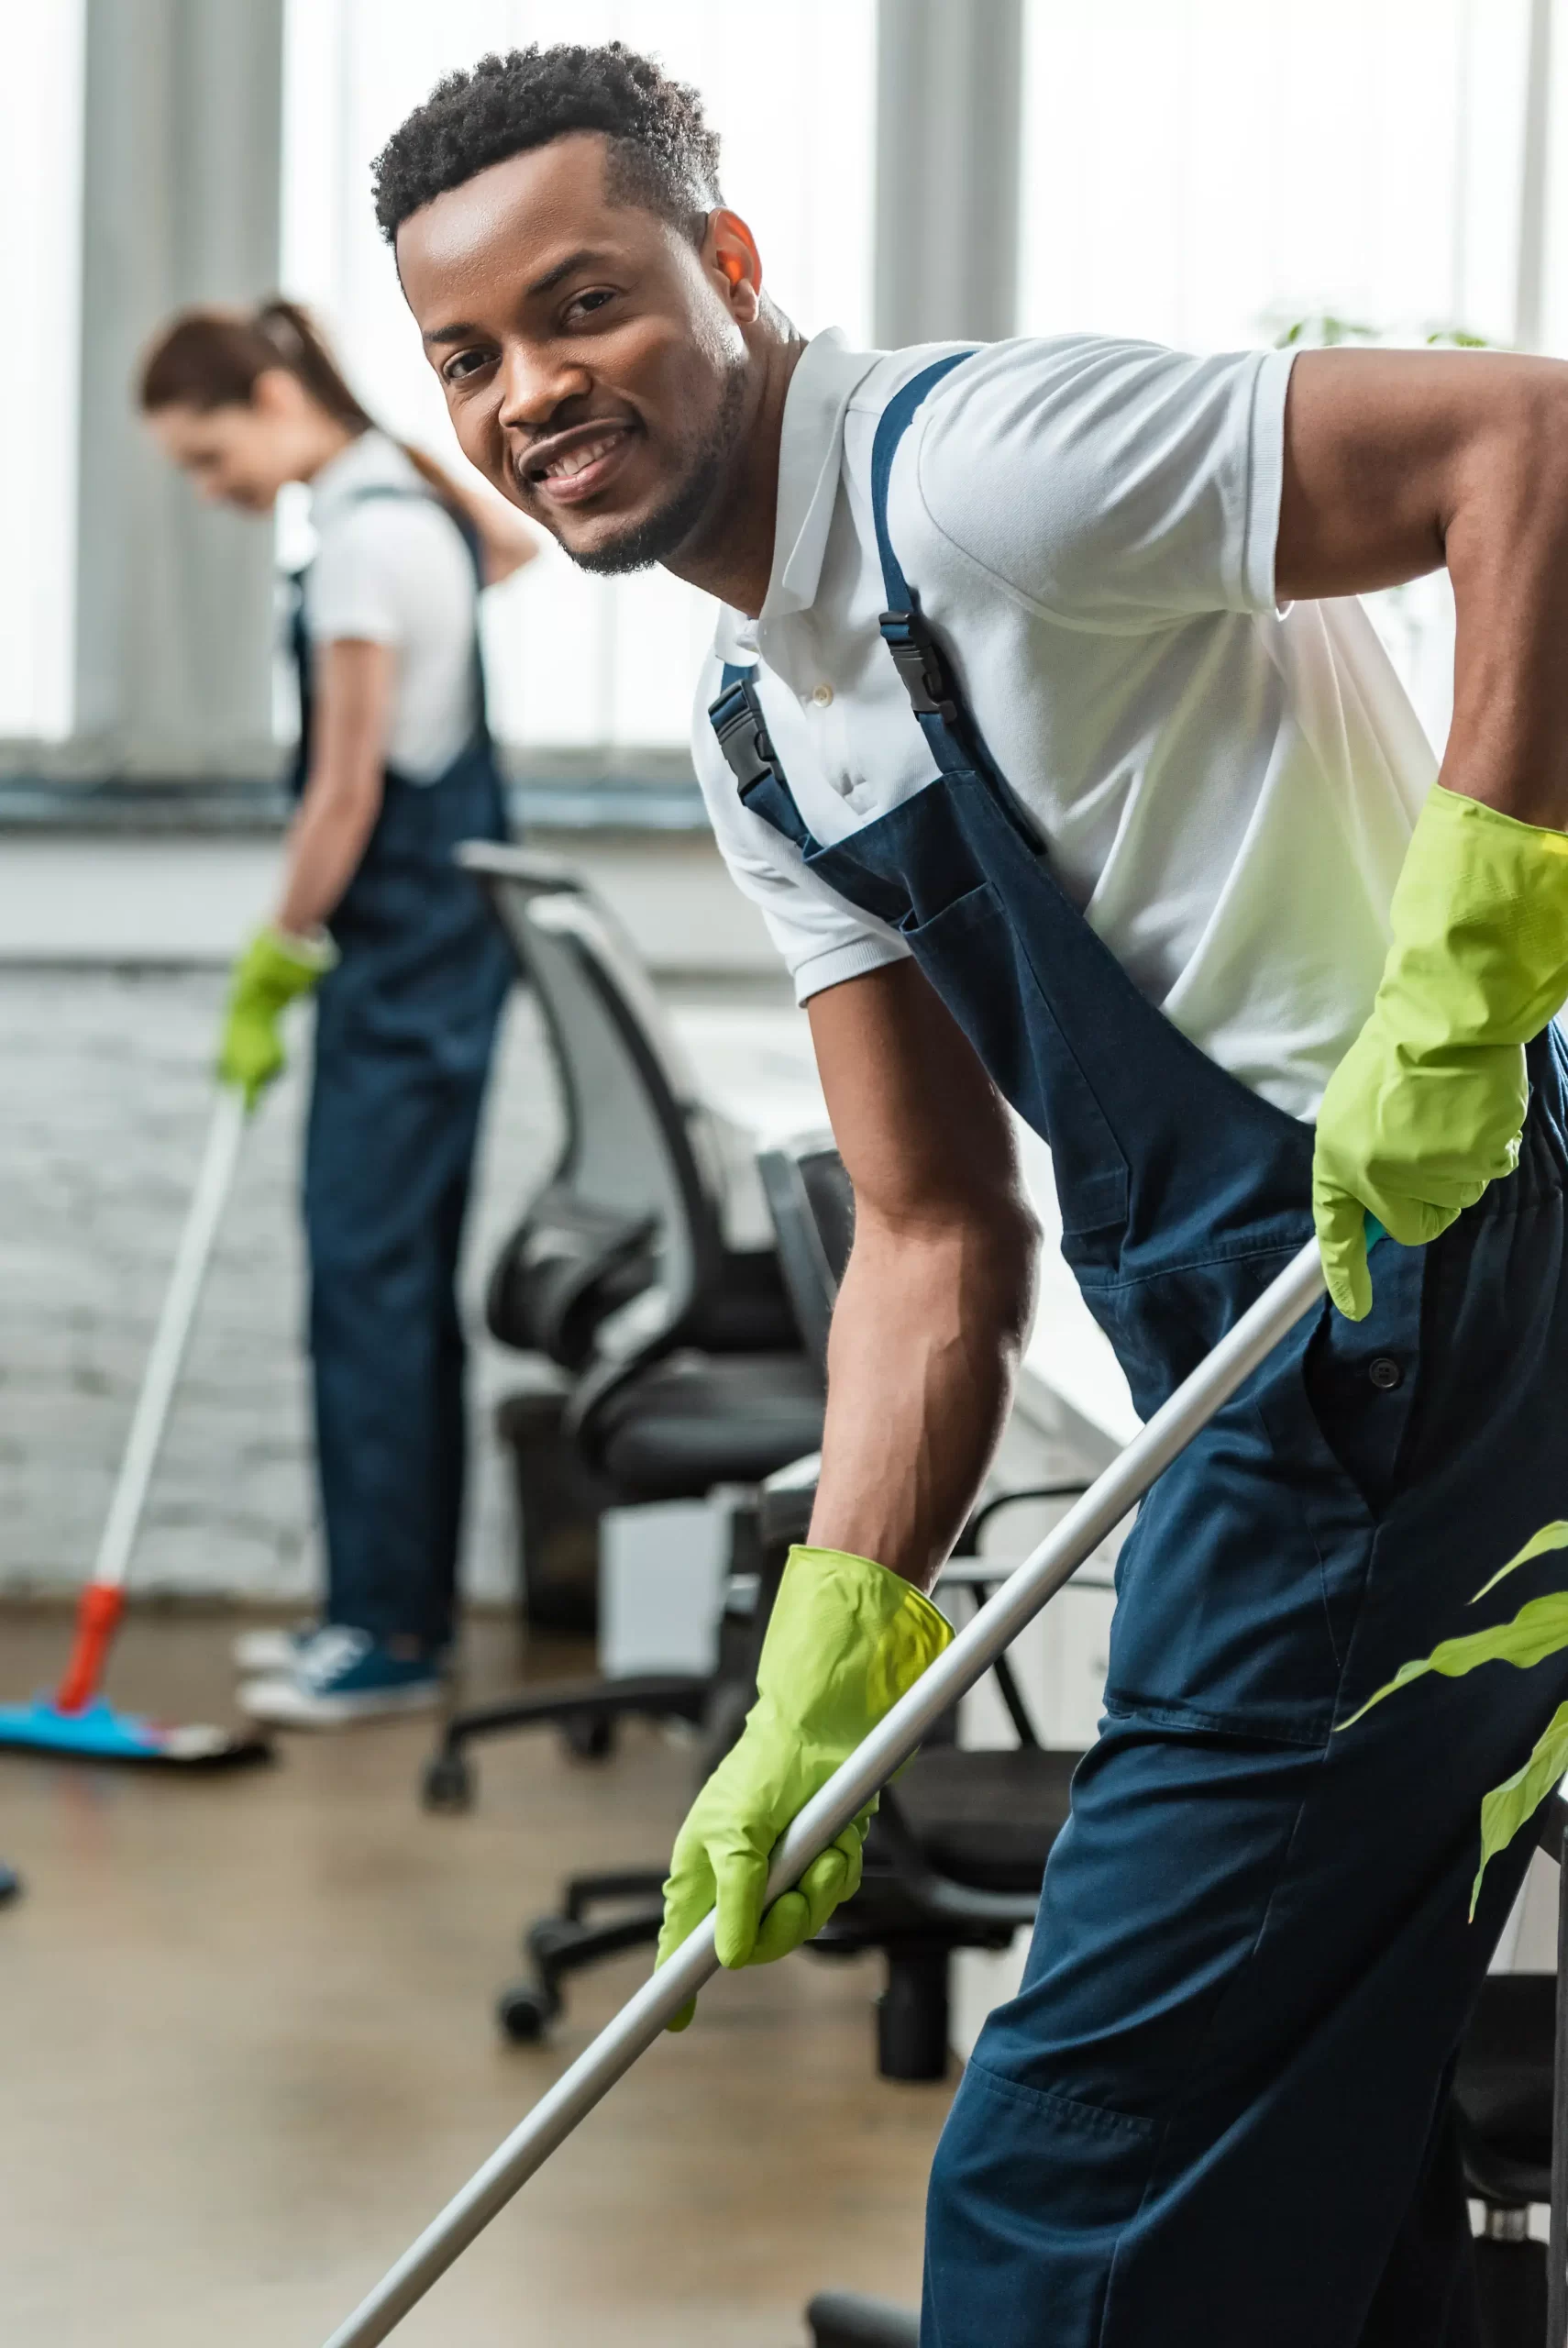 A cropped image of a working man smiling while cleaning